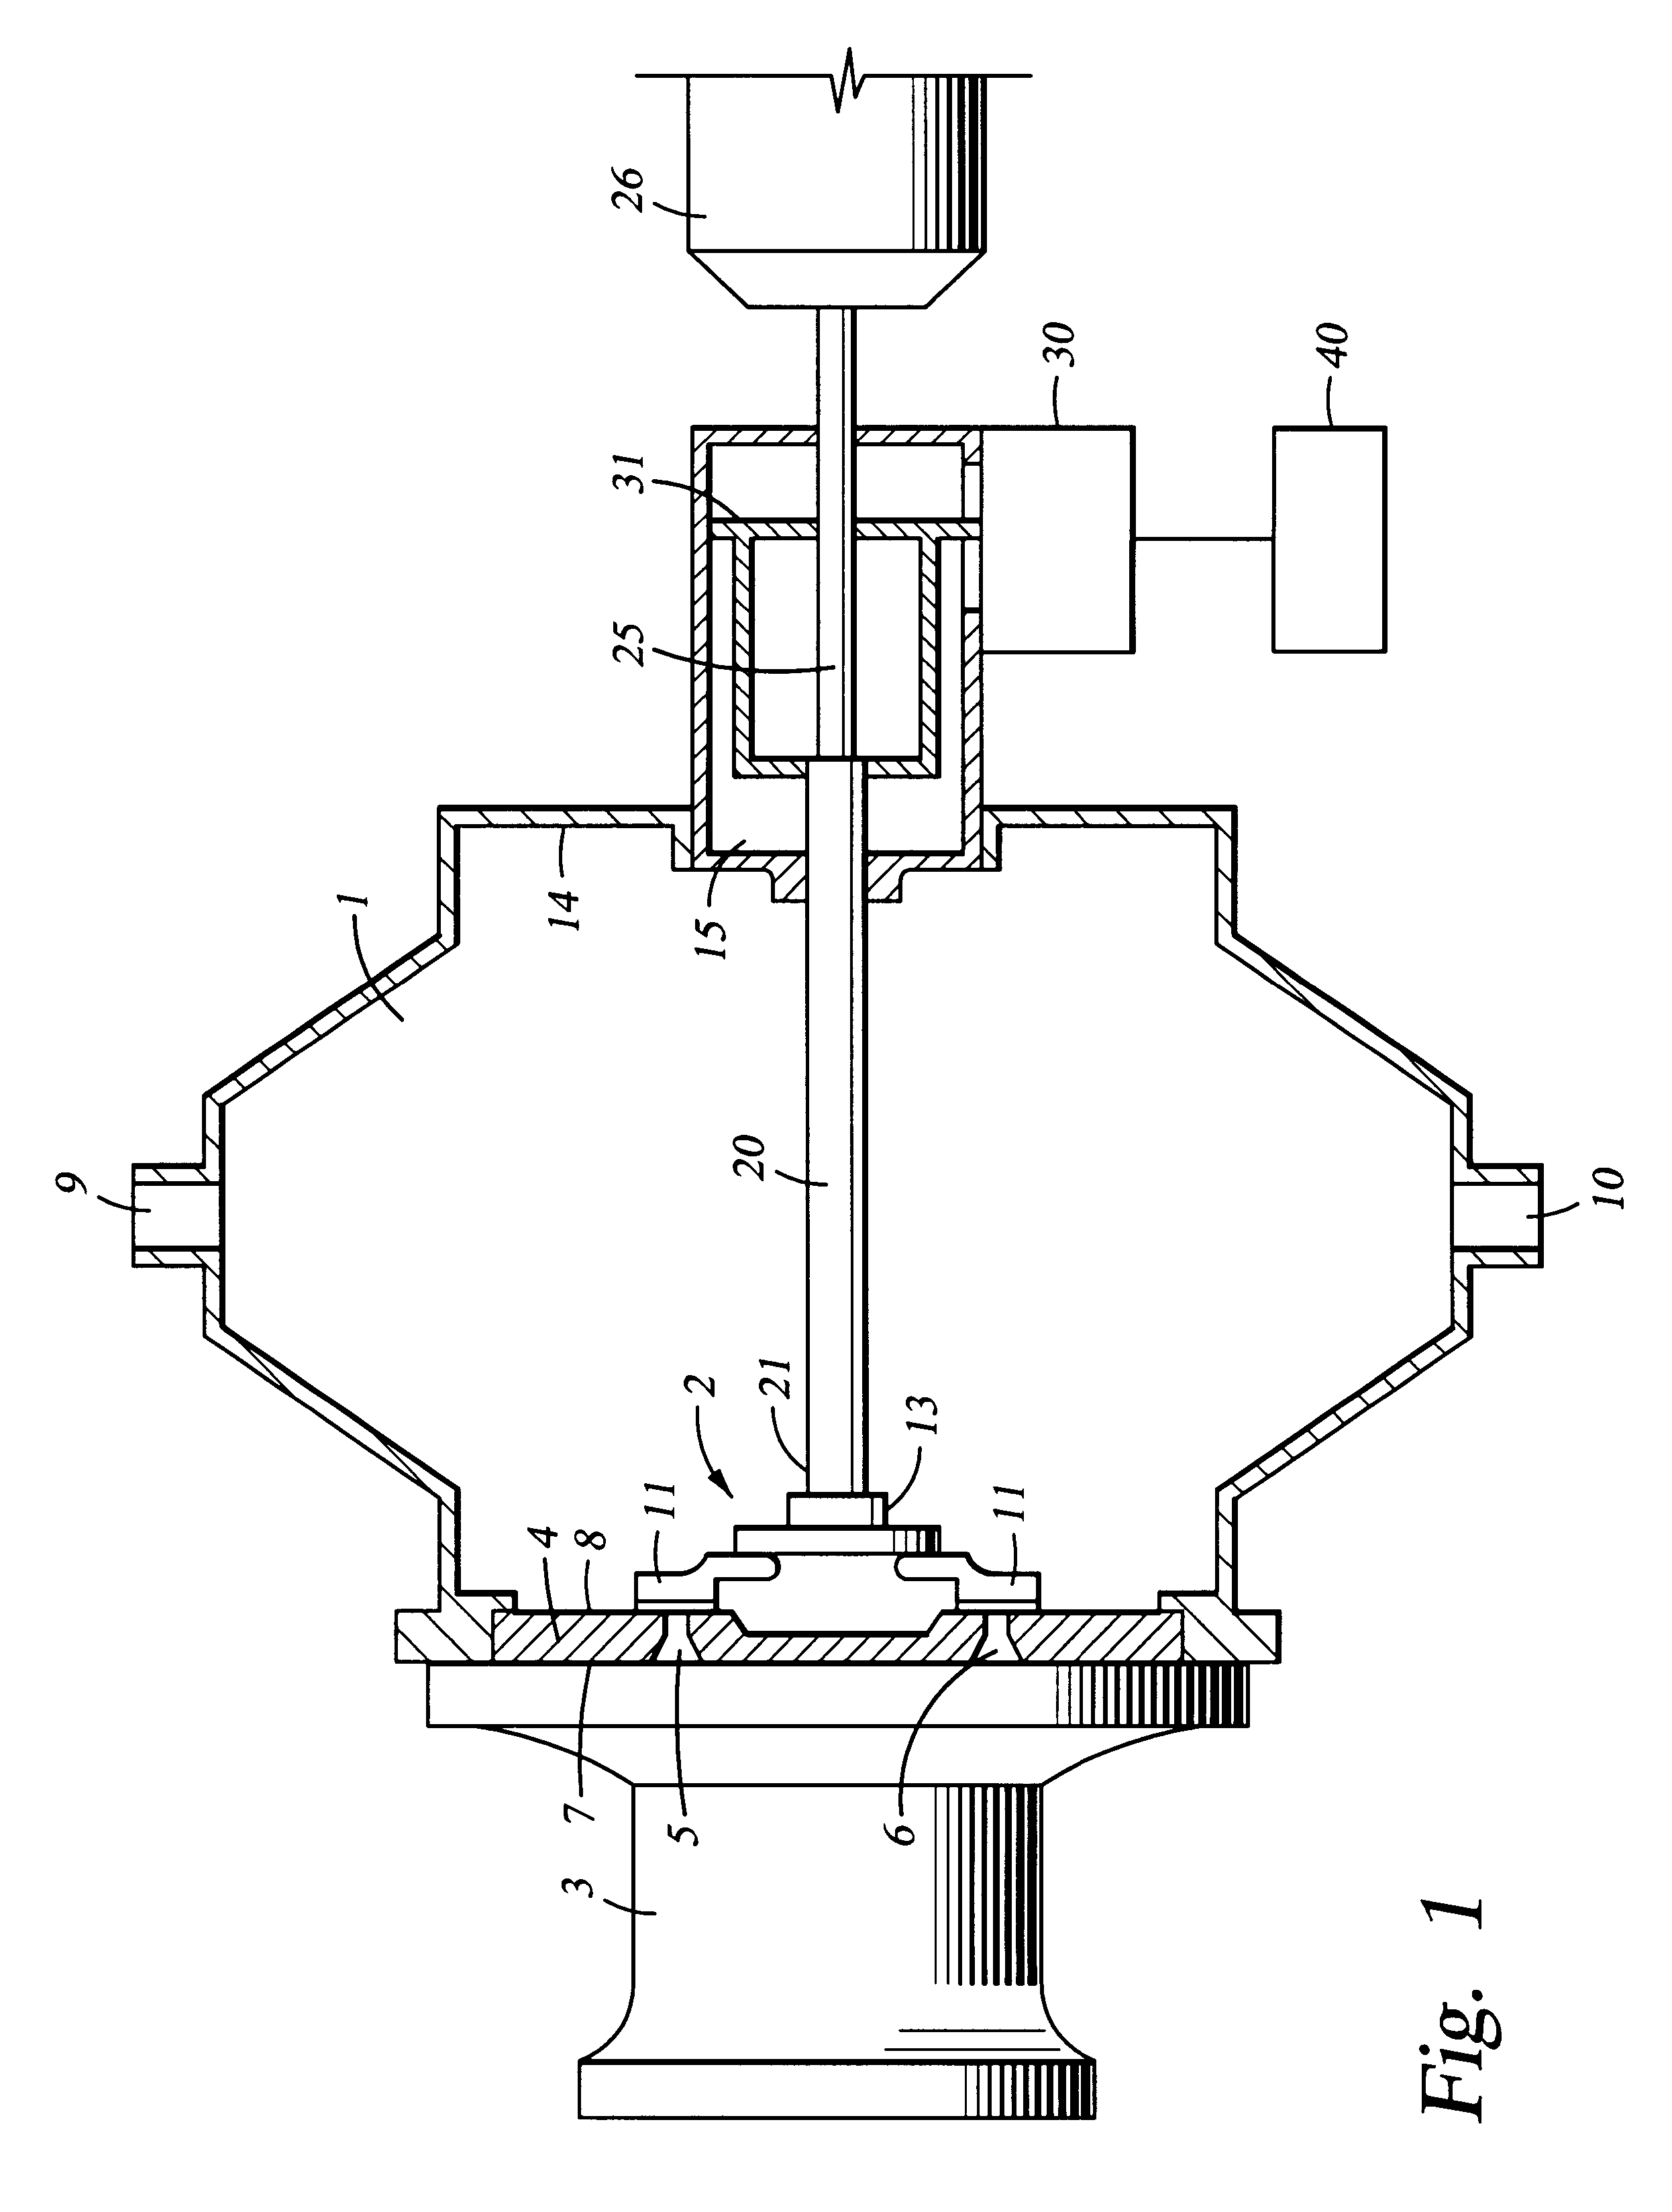 Polymer pelletizing indexing system